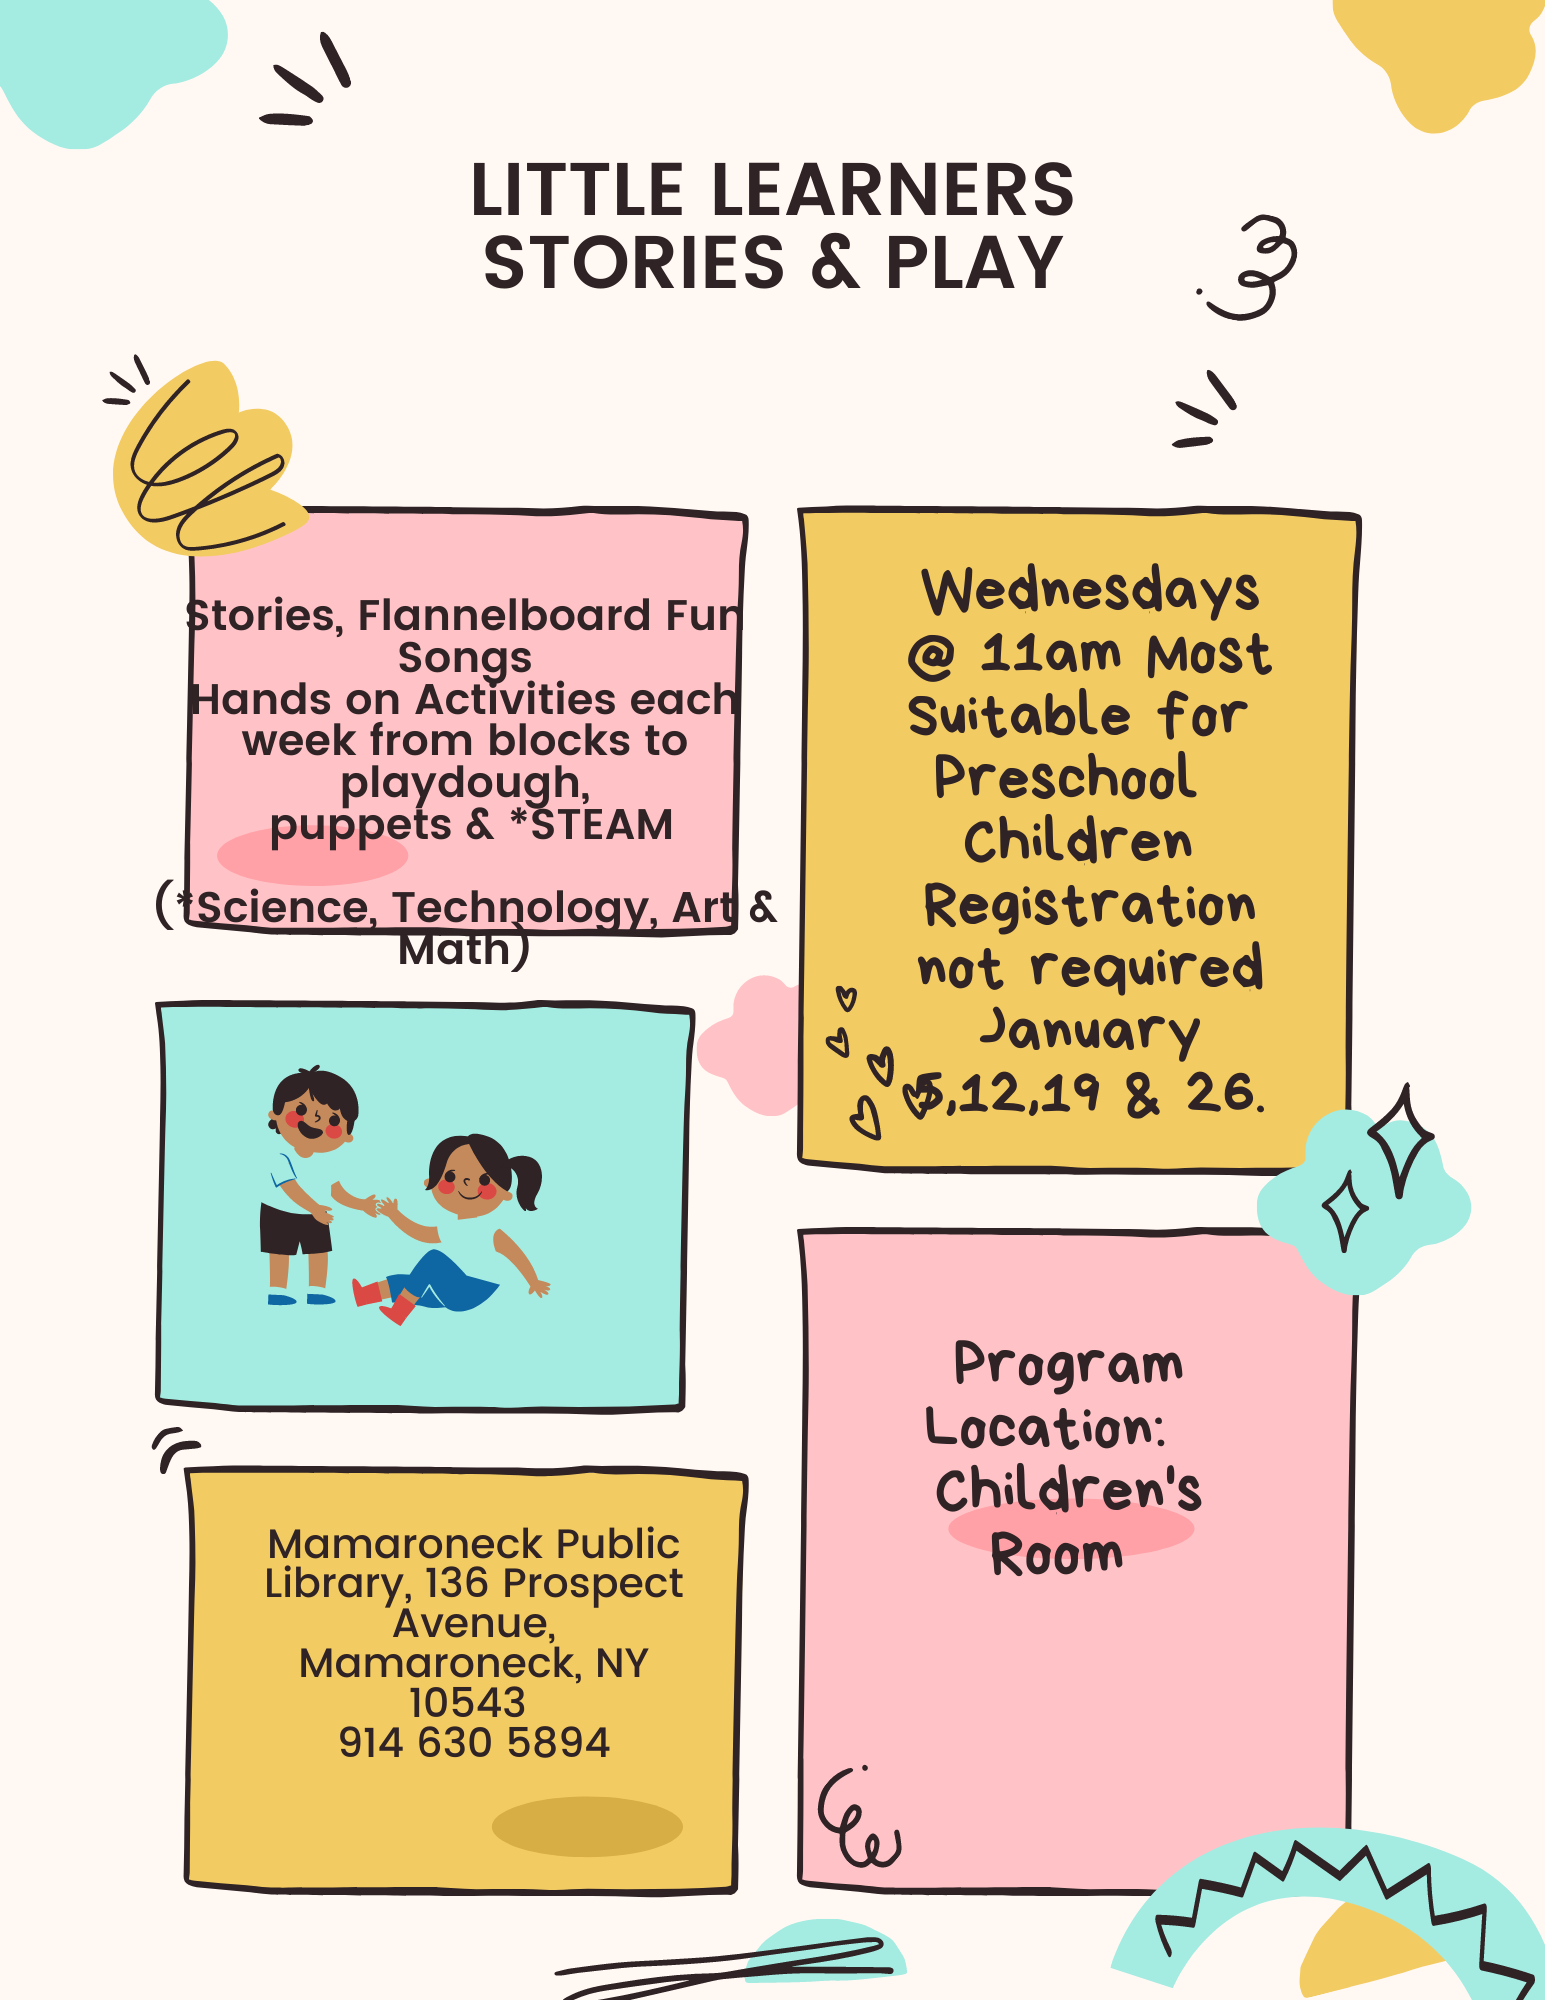 Little Learners Story & Play